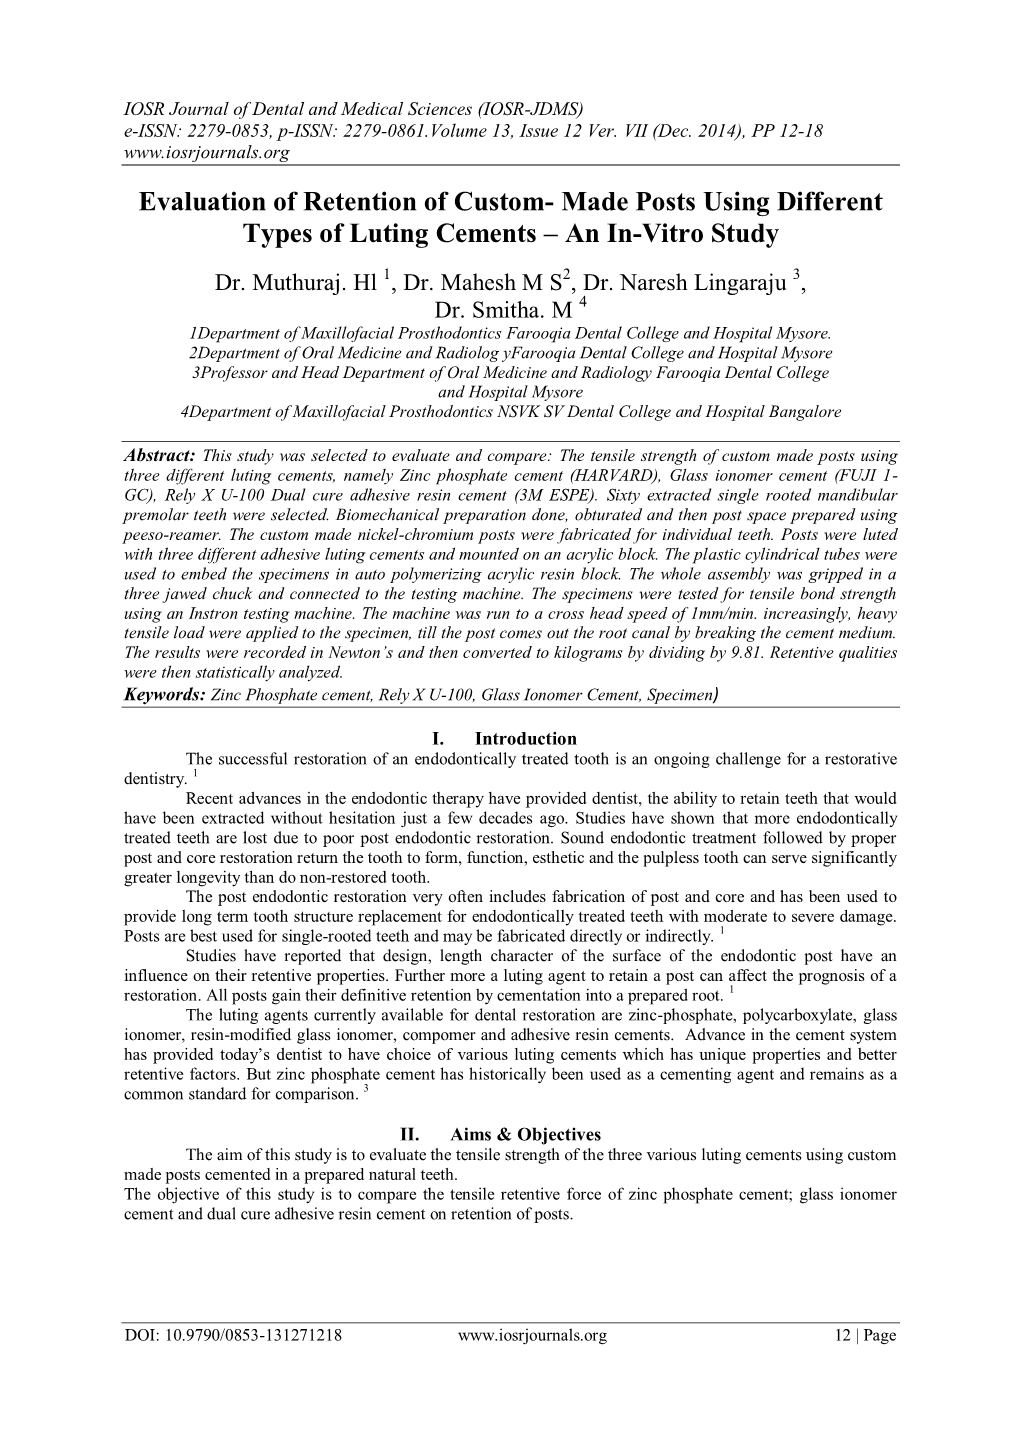 Made Posts Using Different Types of Luting Cements – an In-Vitro Study